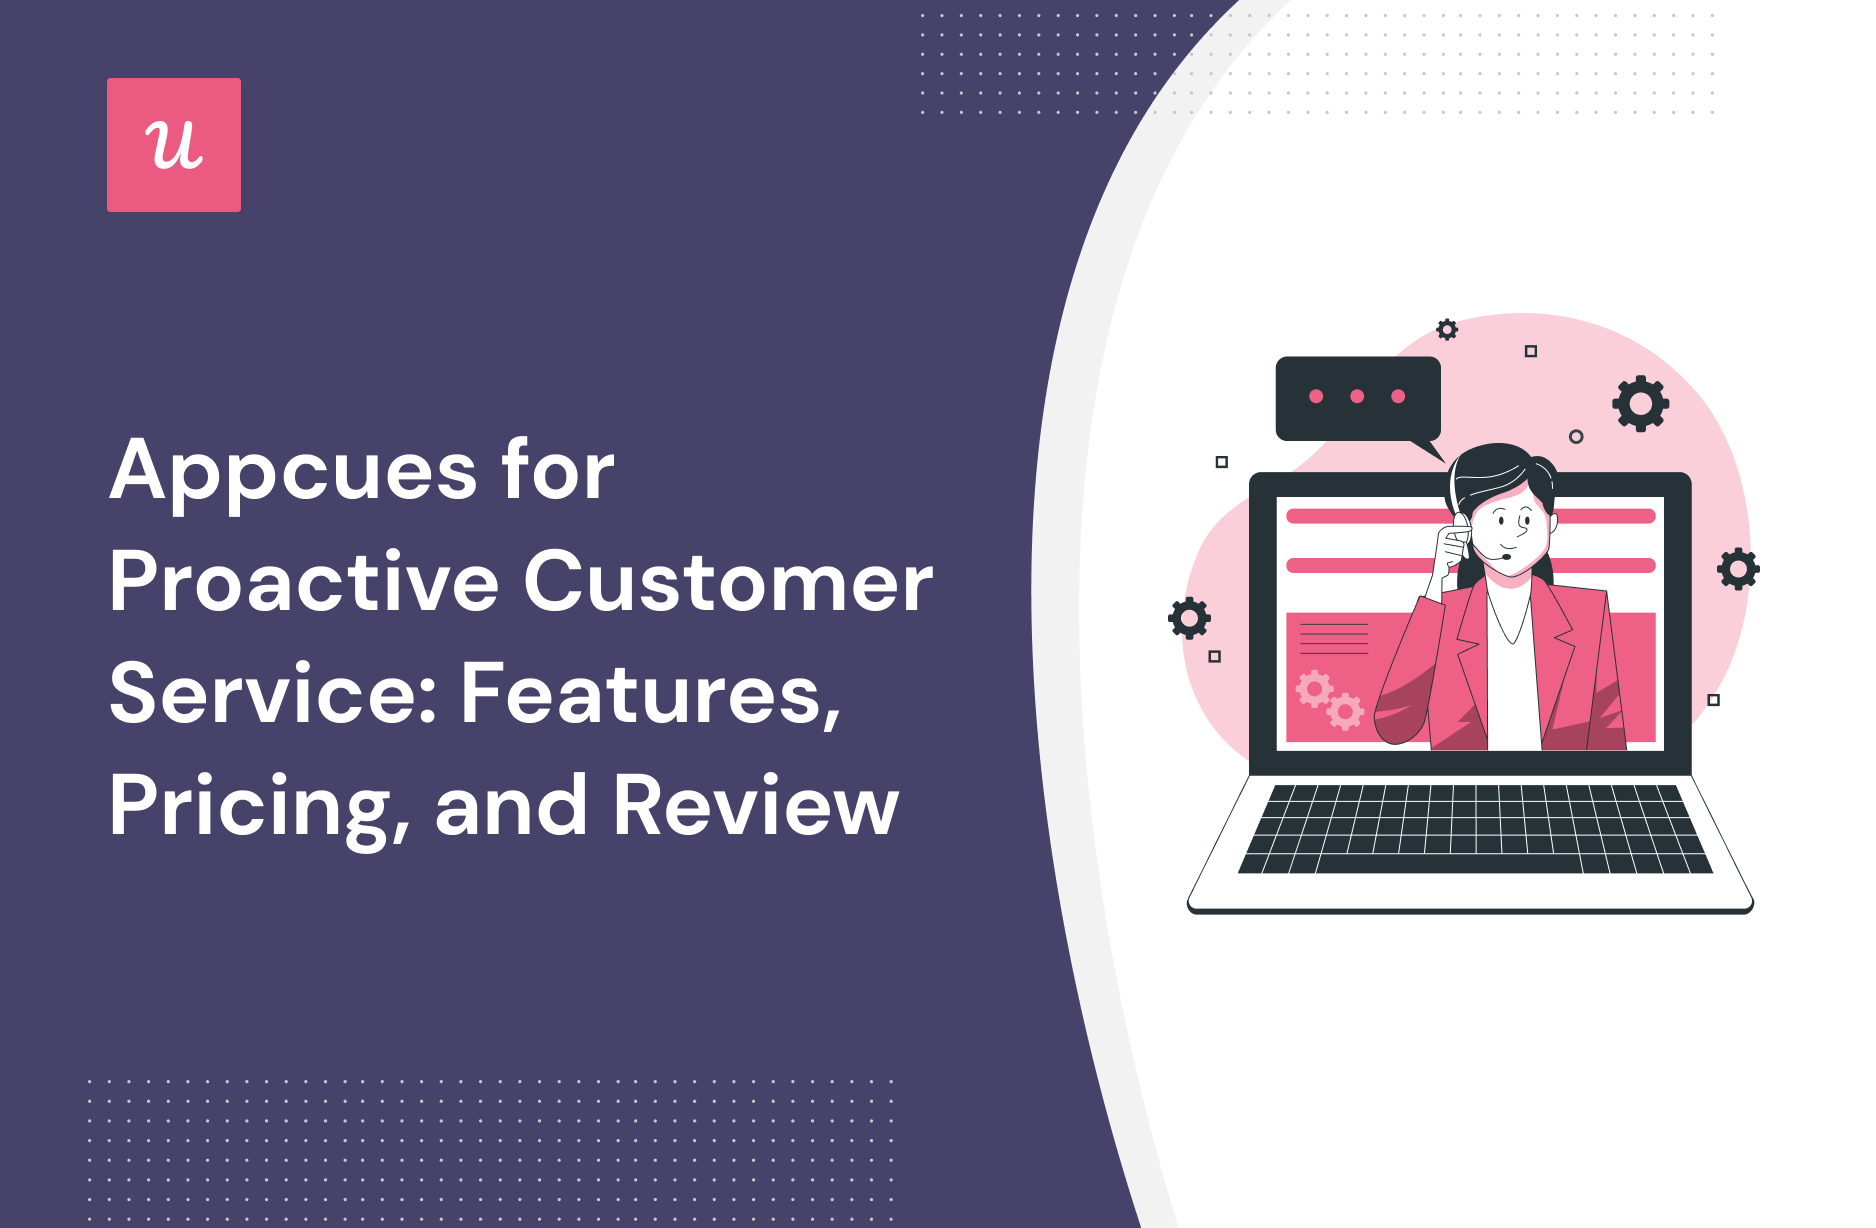 Appcues for Proactive Customer Service: Features, Pricing, and Review